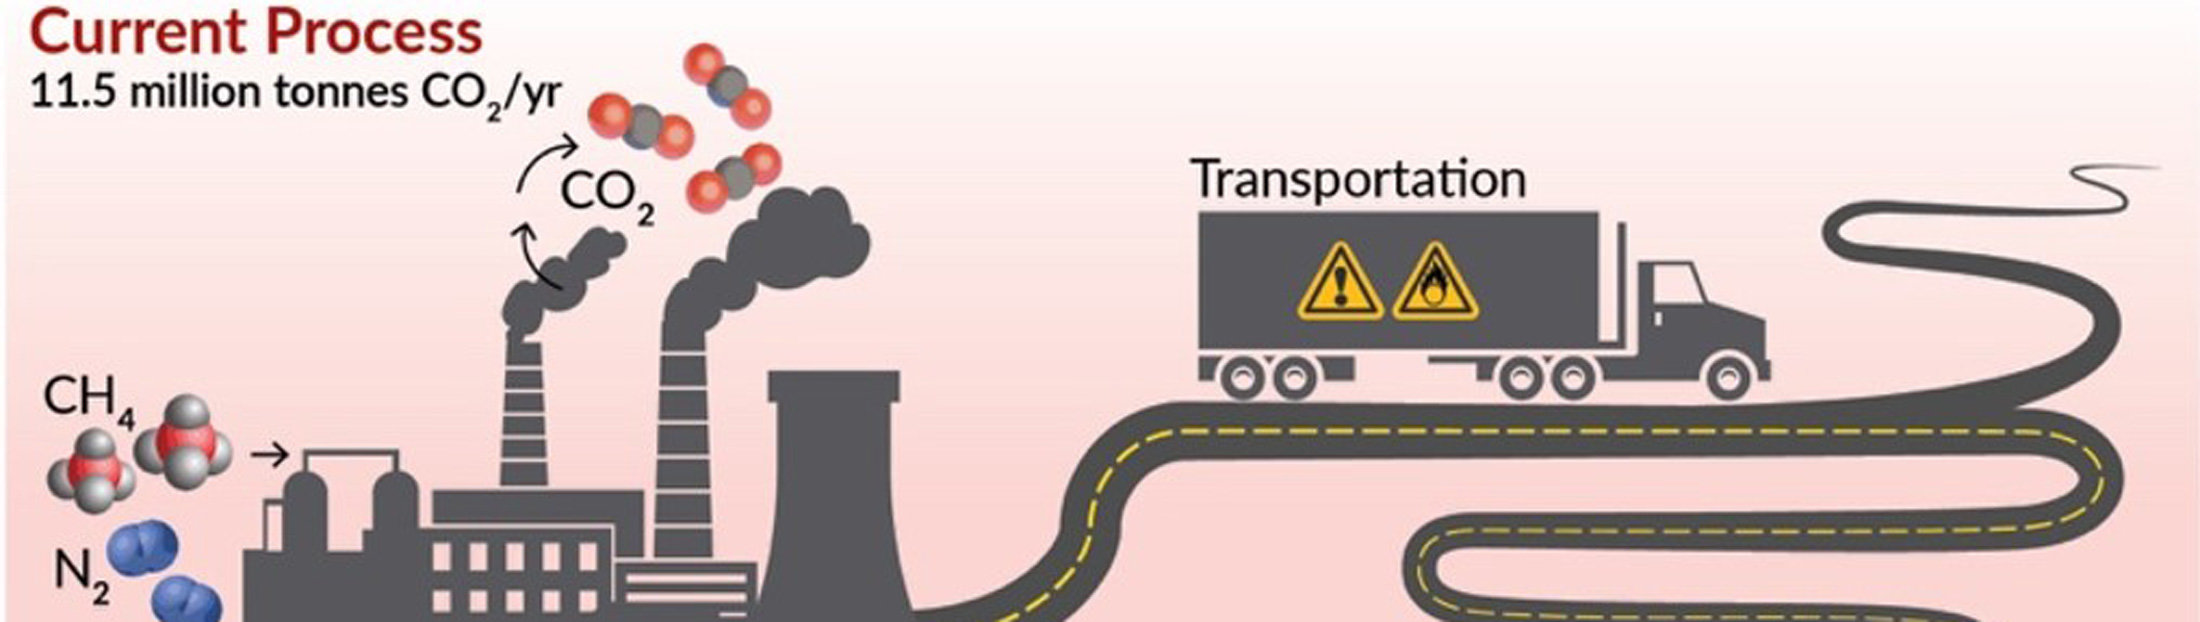 The "current process" panel shows a gray factory belching smoke and carbon dioxide molecules, annotated with "11.5 million tonnes of CO2 per year", with methane and nitrogen molecules for inputs. Driving away from the factory is a gray truck with hazard symbols on it. A reddish background conveys a sense of alarm. The proposed process is a circle with a green background. It shows nitrates captured from water and carbon dioxide from air, combining with the help of a solar panel. The urea fertilizer on the corn plant ends up back in the water as nitrates. The bones of a fish float in the runoff zone, from which the nitrates are harvested, while a healthy trout leaps from the clean water near the solar panel.